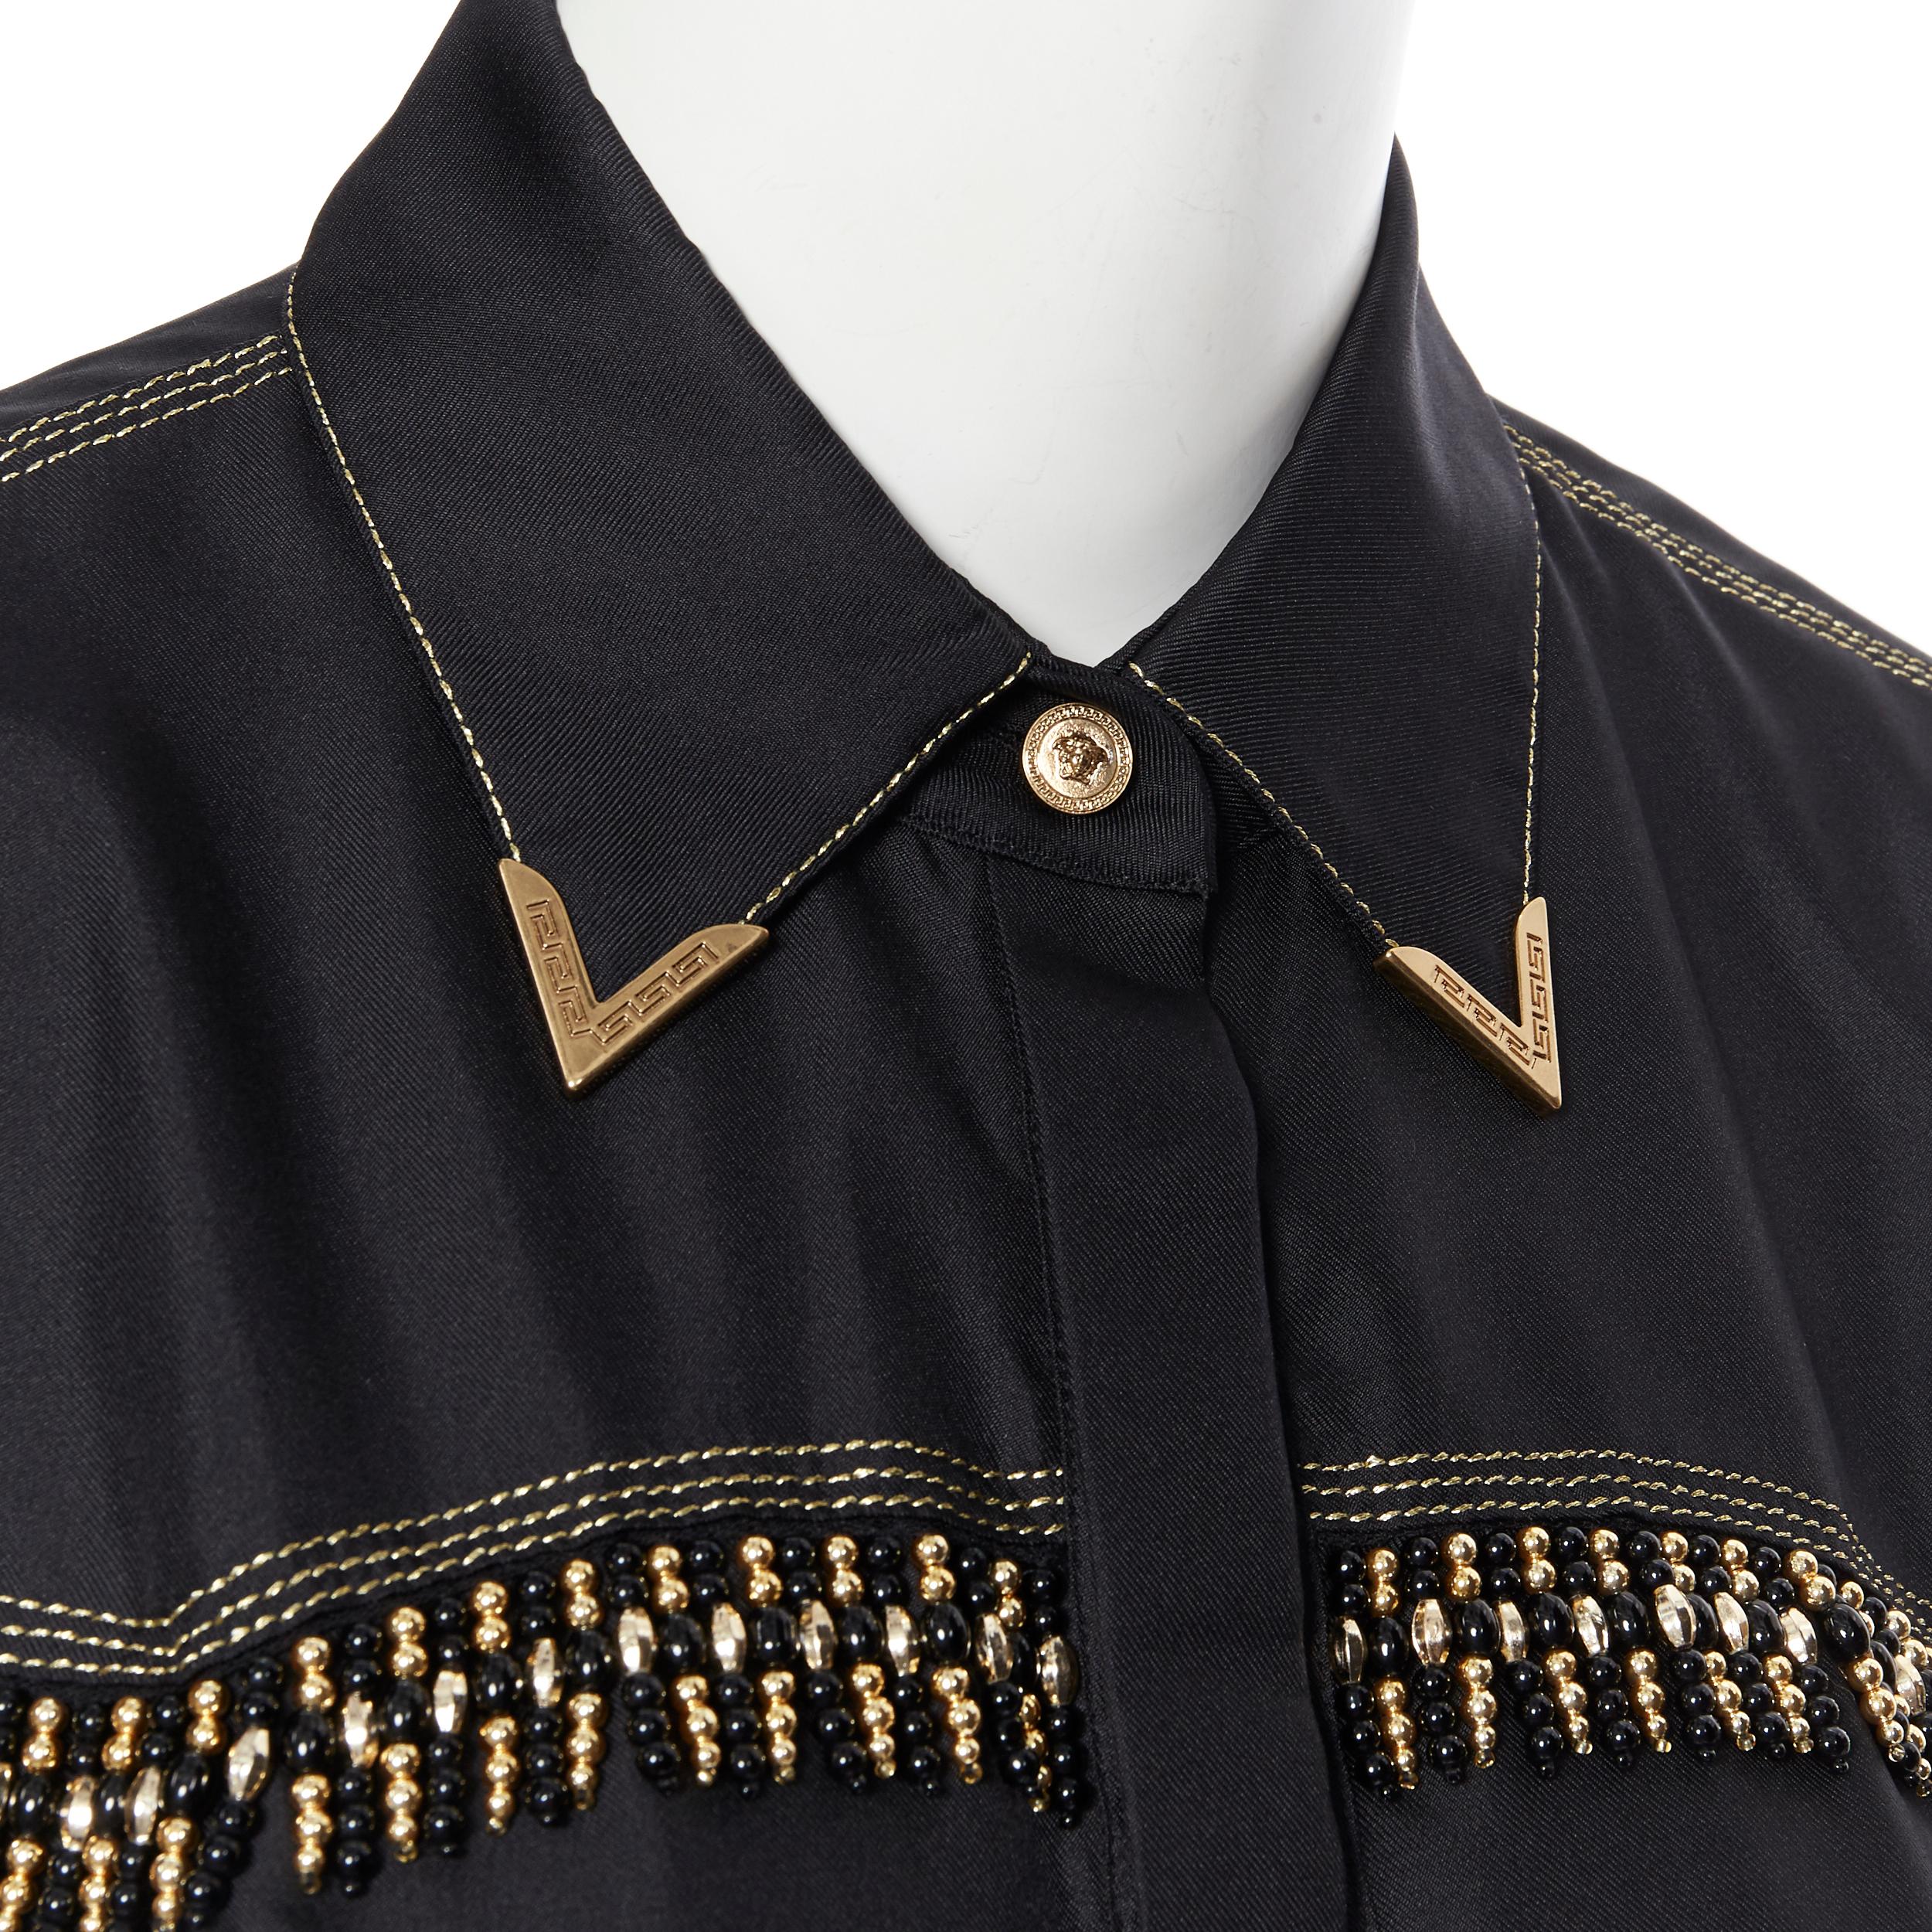 new VERSACE SS18 Tribute Runway black silk gold bead fringe western shirt IT40
Brand: Versace
Designer: Donatella Versace
Collection: Spring Summer 2018
As seen on: Donatella Versace
Model Name / Style: Western shirt
Material: Silk
Color: